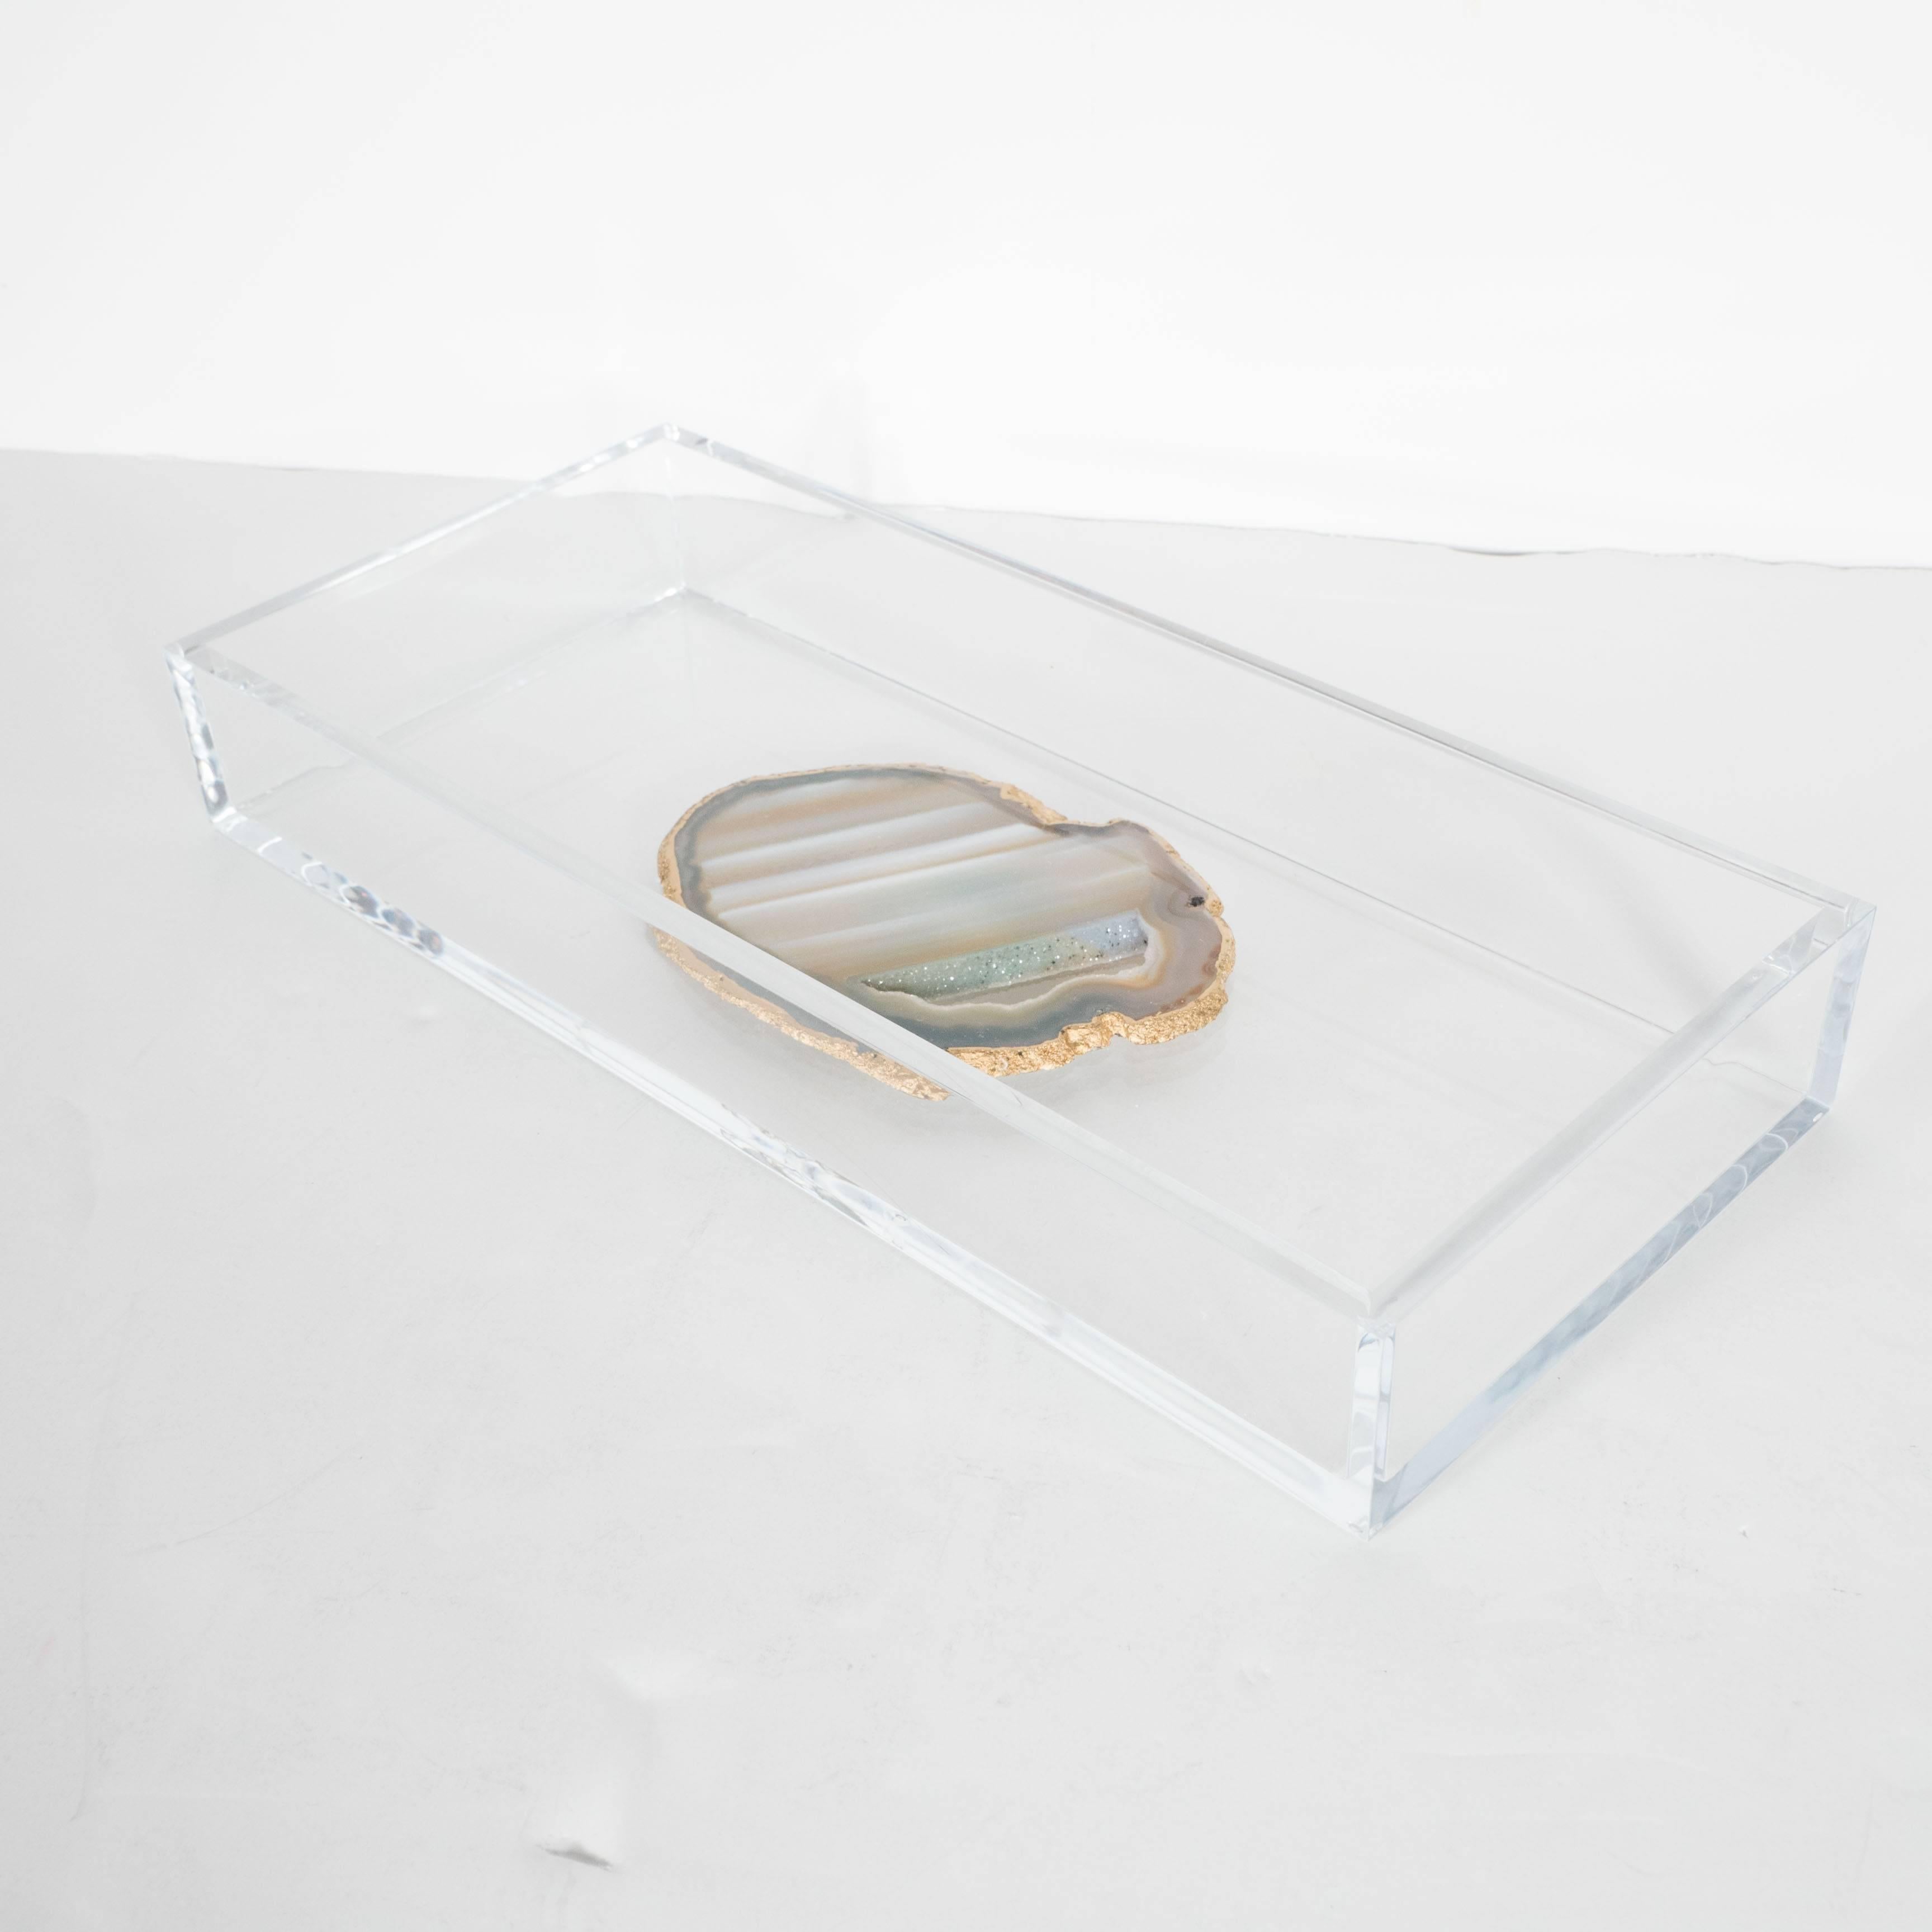 This modernist rectangular tray is in Lucite with a central sliced agate insides of grey and natural hues. A great desk tray or catch all,
American,
20th century.